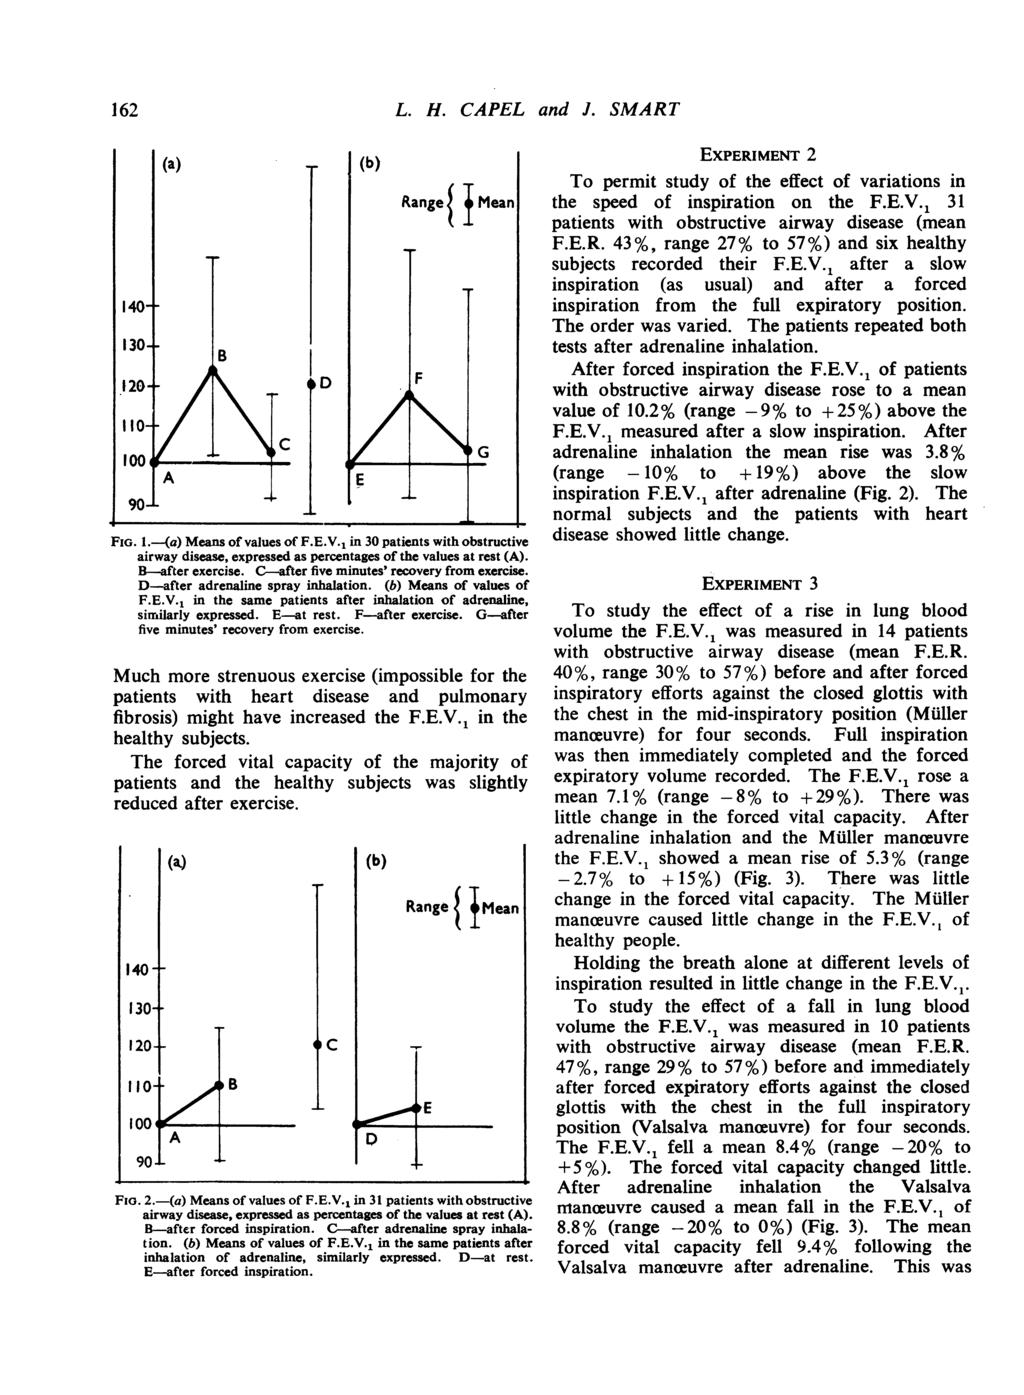 162 1204 (a) 100, A 90-L L_ B %tc FIG. 1.-(a) Means of values of F.E.V.1 in 30 patients with obstructive B-after exercise. C-after five minutes' recovery from exercise.